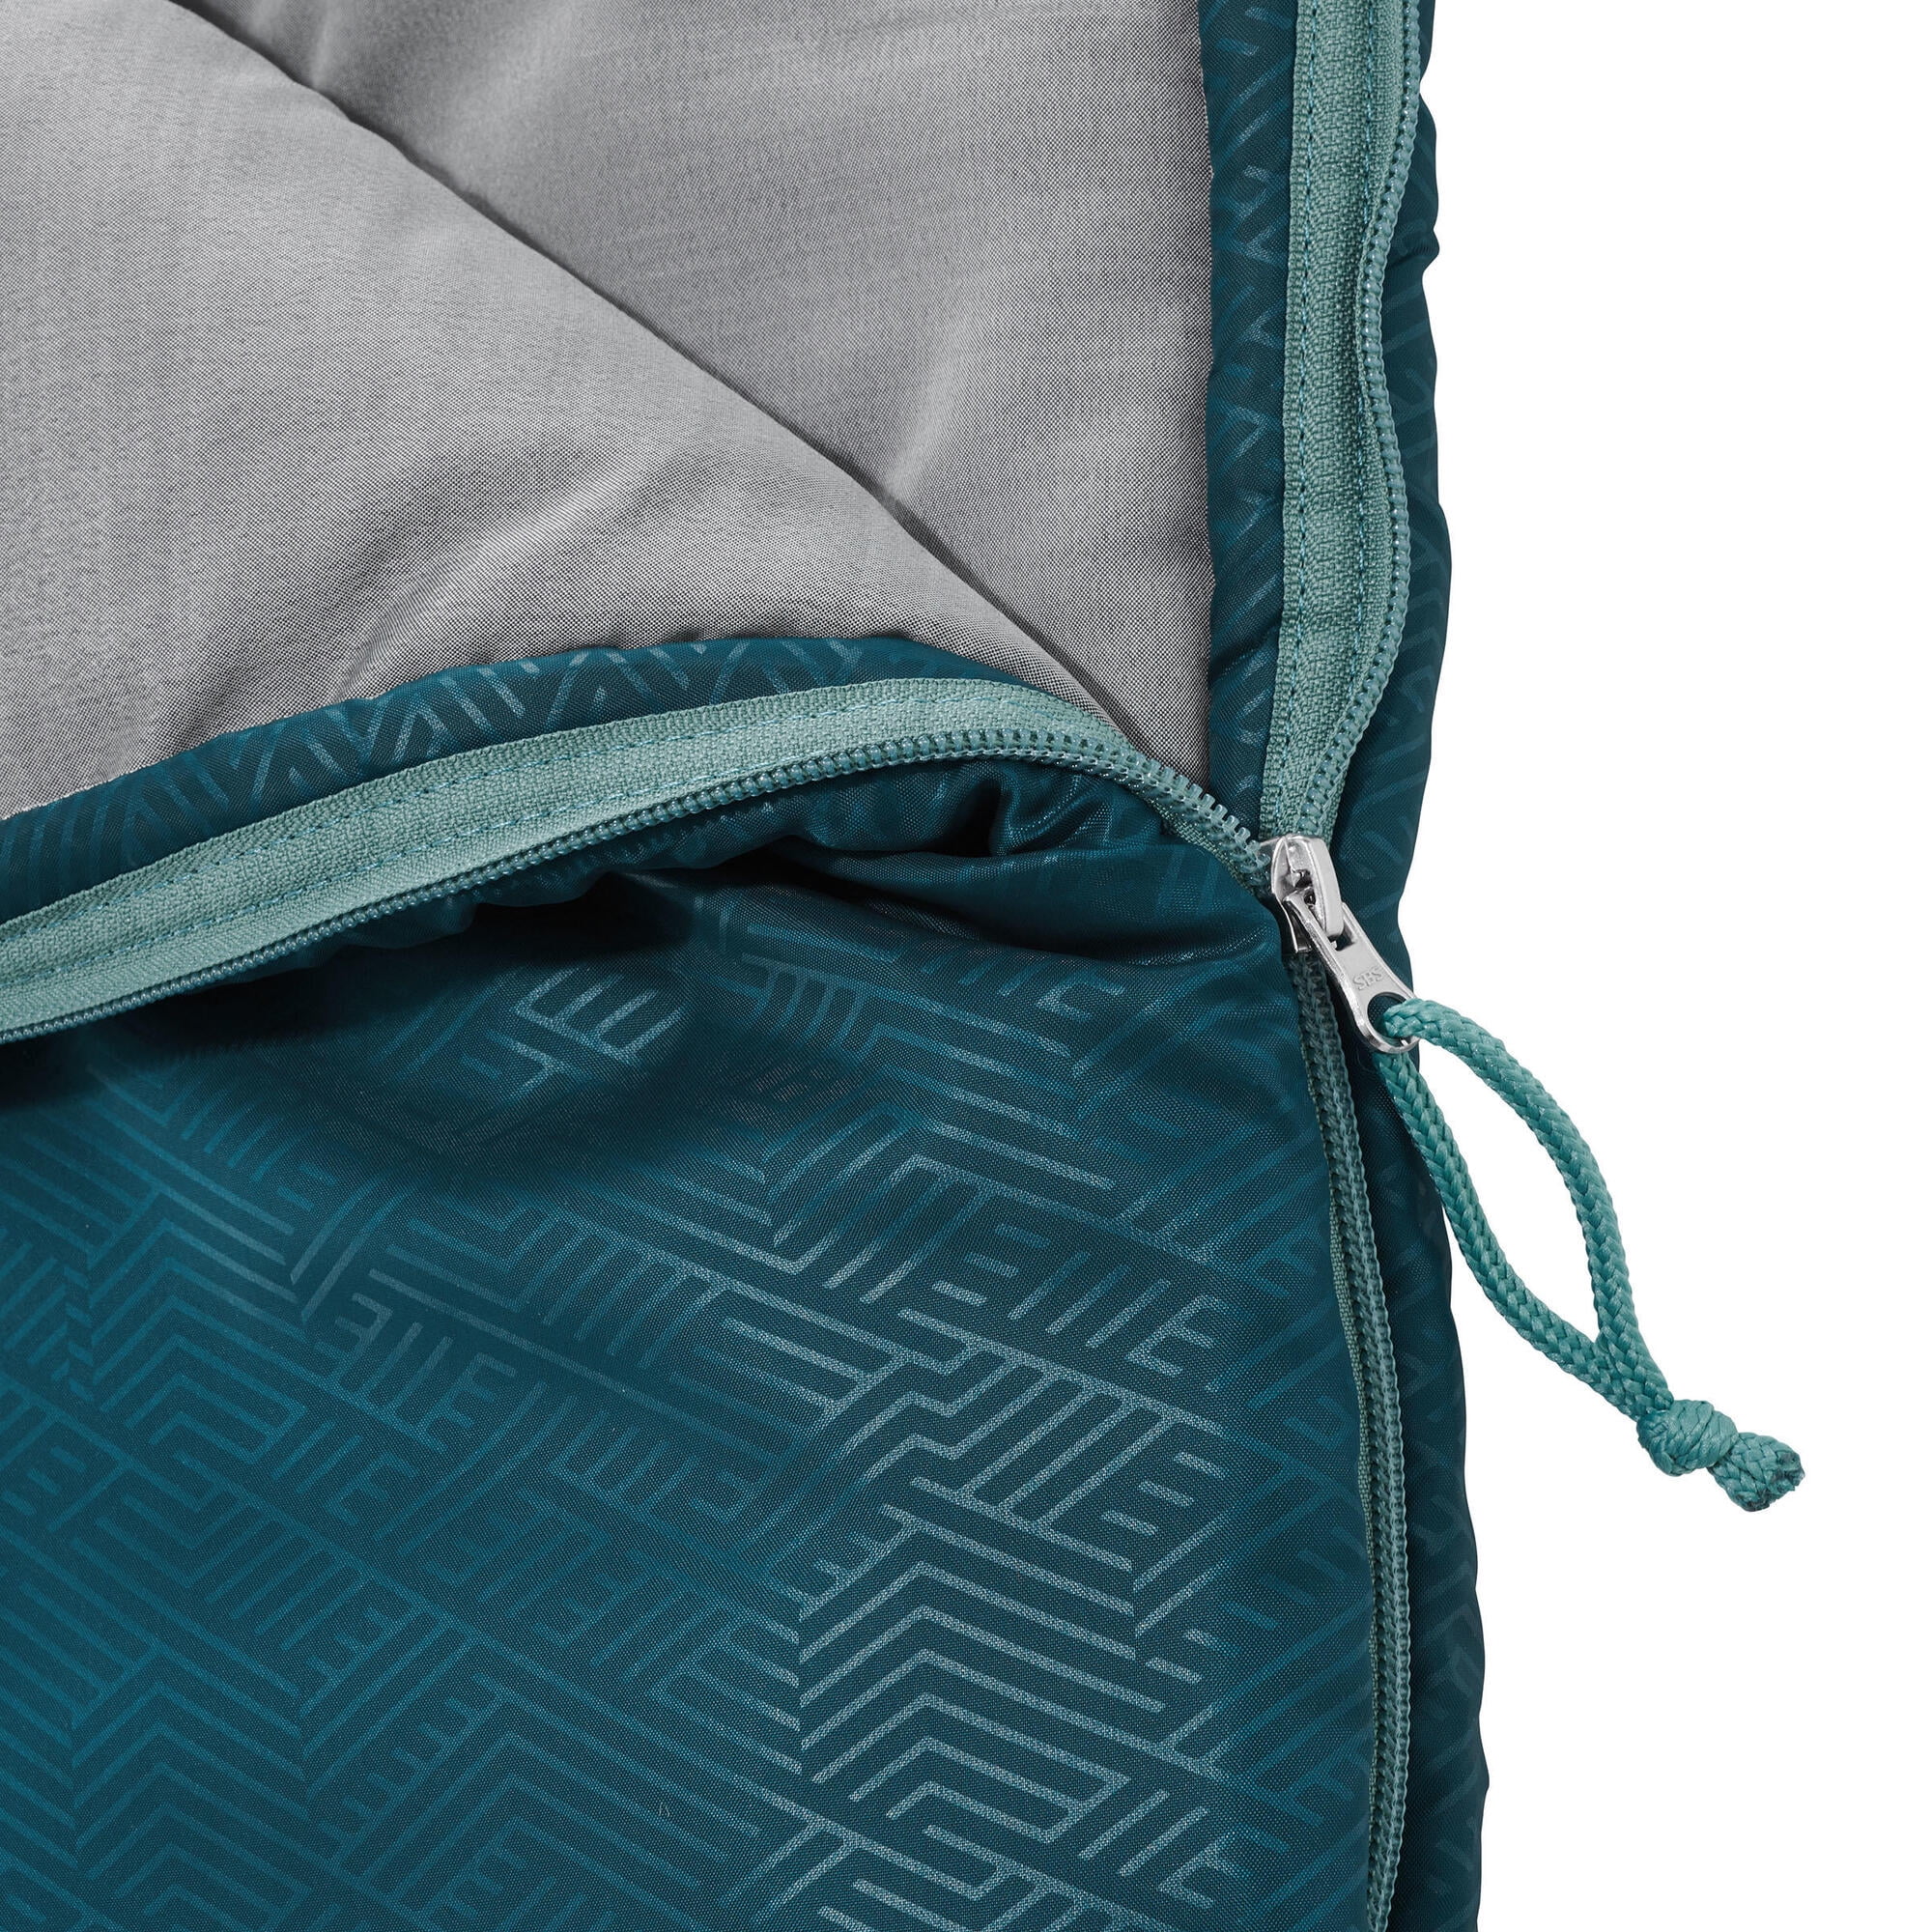 QUECHUA BACKPACK ARPENAZ 10 on Behance